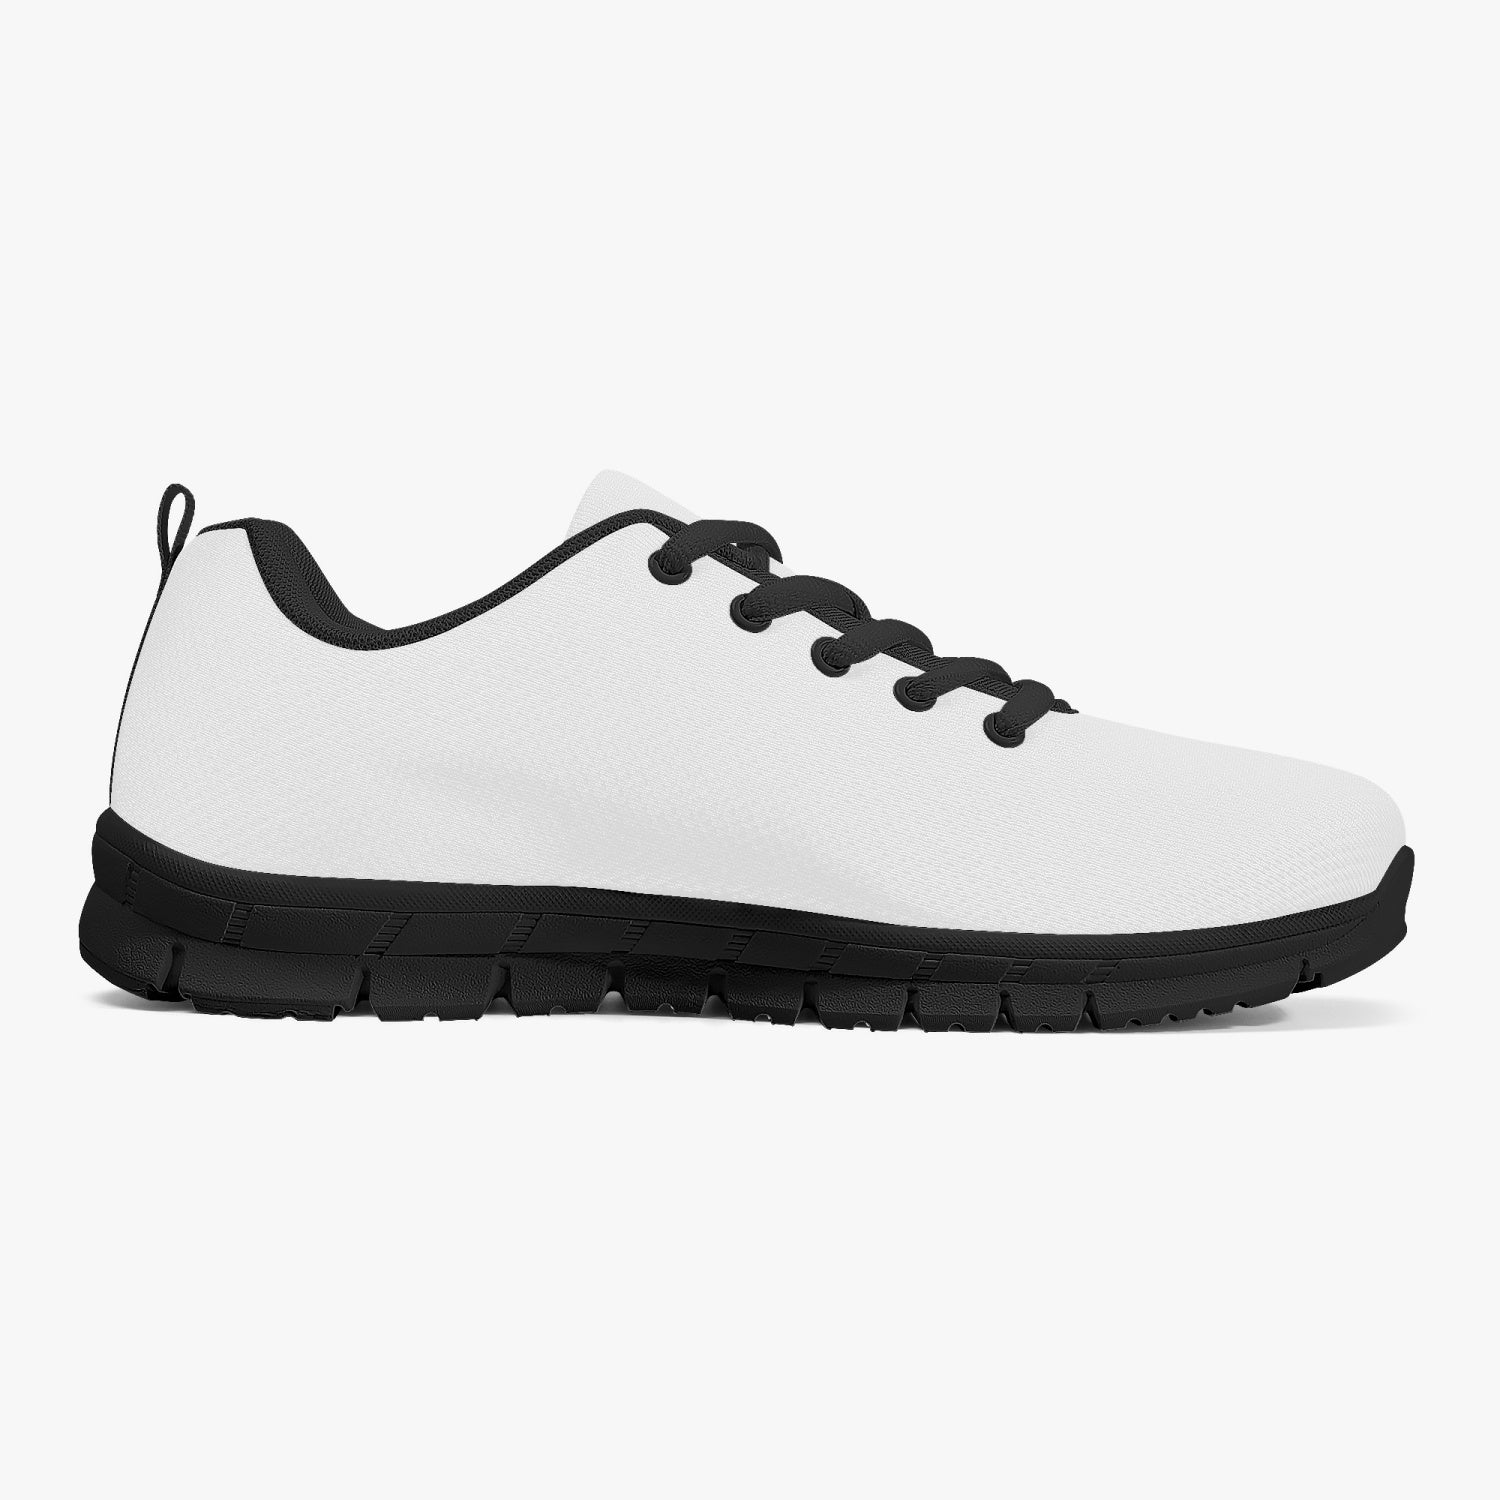 t-nor Classic Lightweight Mesh Sneakers - White/Black